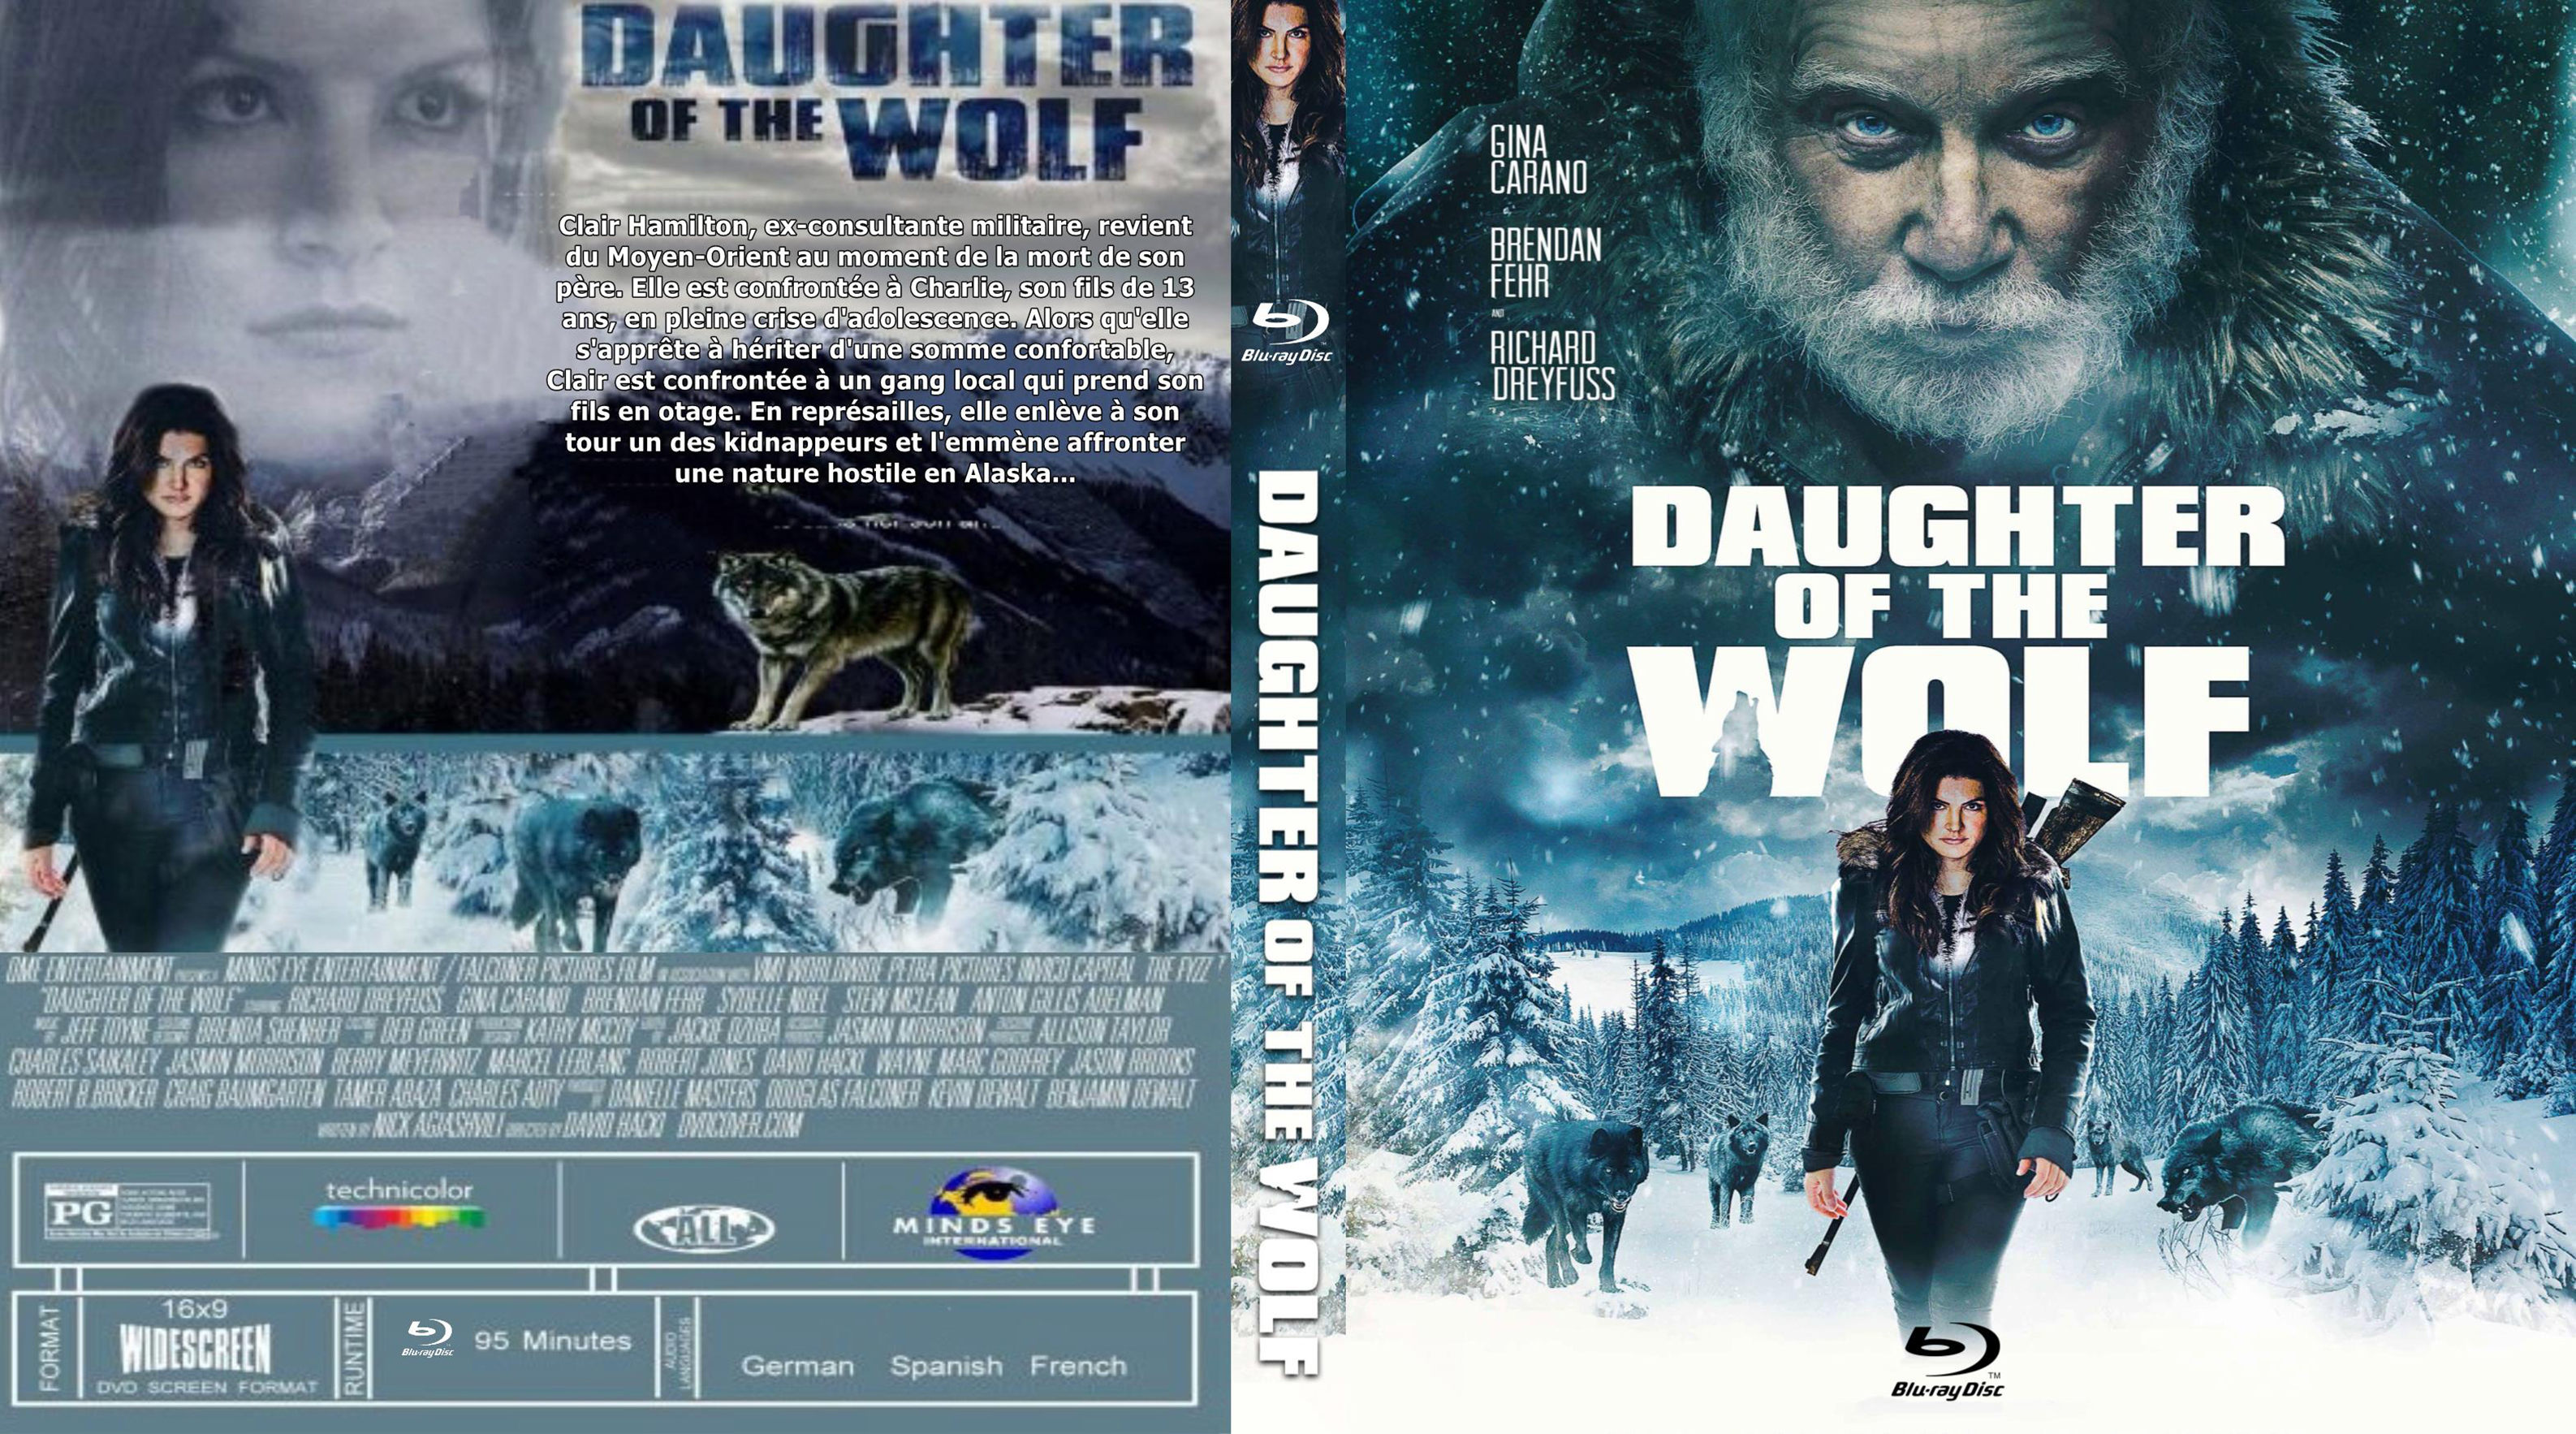 Jaquette DVD Daughter of the wolf custom (BLU-RAY)